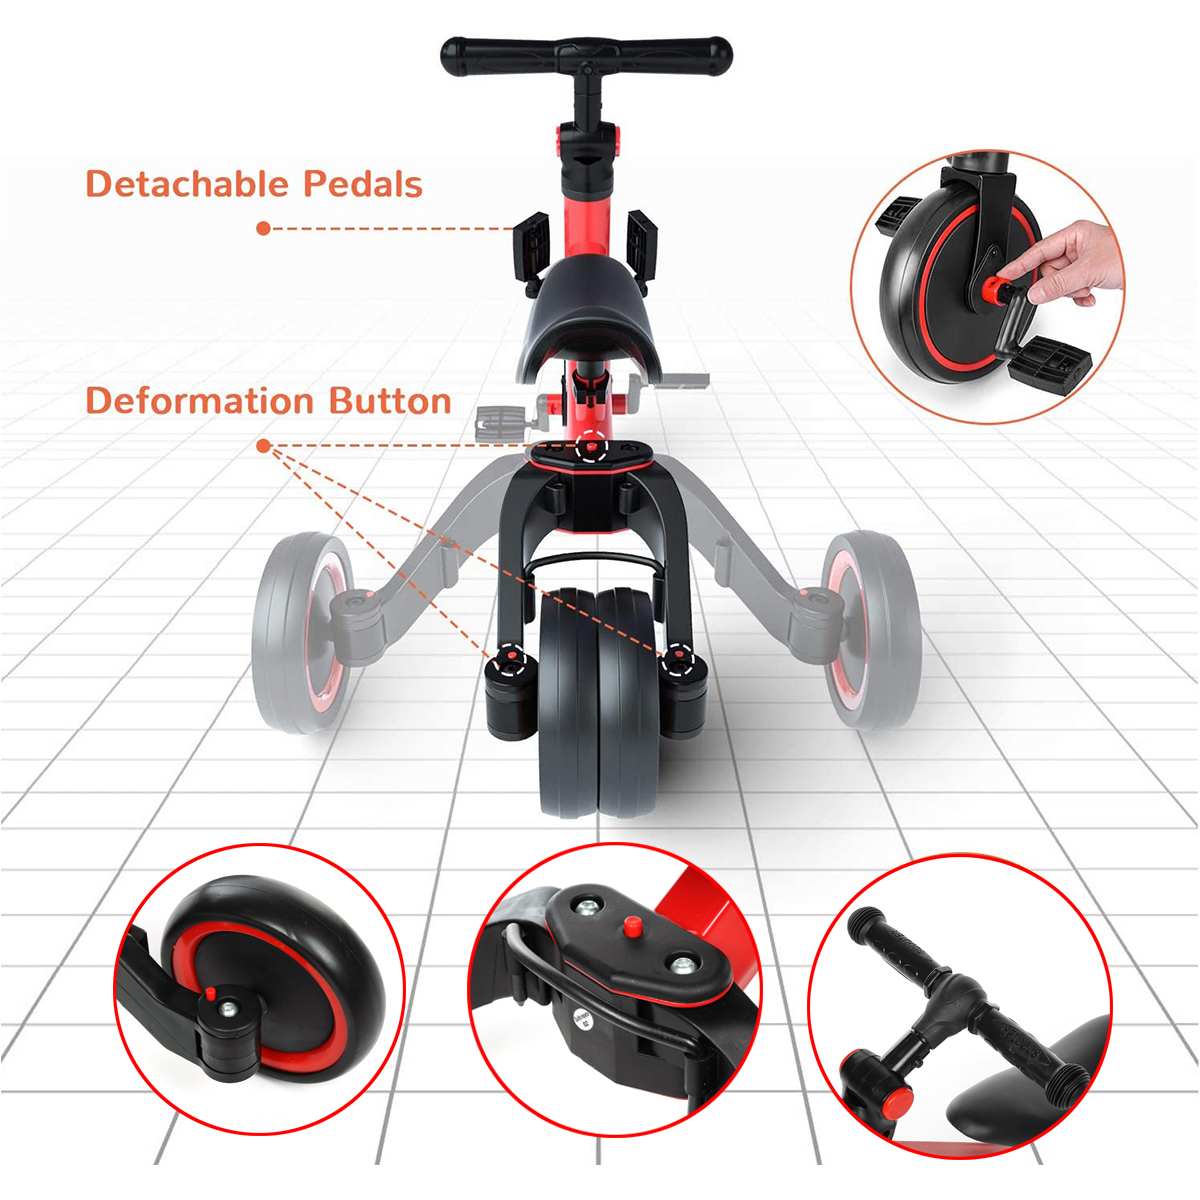 Mini Baby Balance Bike Bicycle Walker Indoor Outdoor Kids Ride on Car Toys Gift for 1-3 years Old Children Learning Walk Scooter